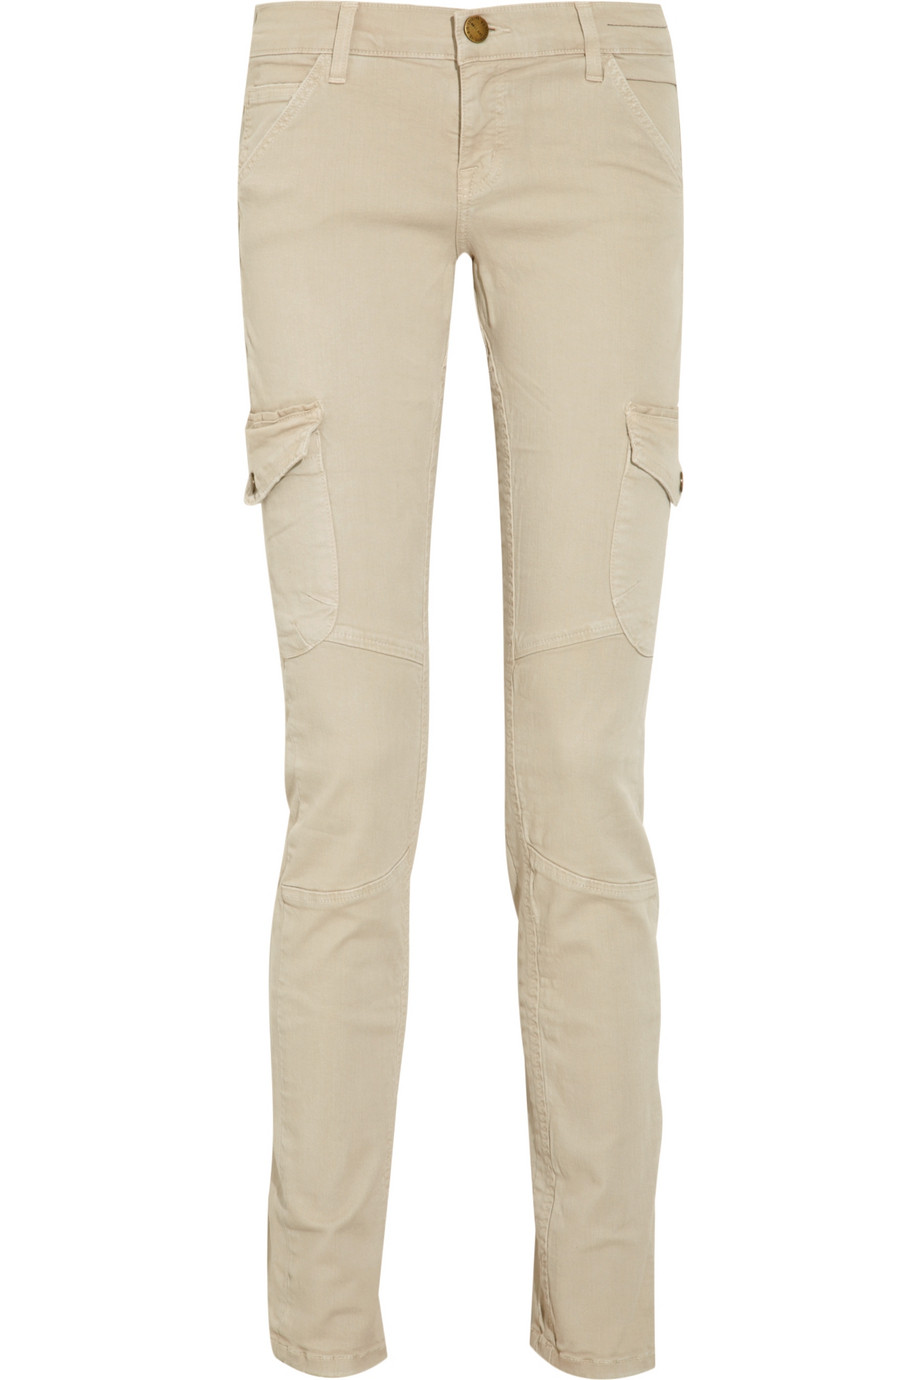 Current/elliott The Skinny Cargo Mid-rise Jeans in Beige (tan) | Lyst